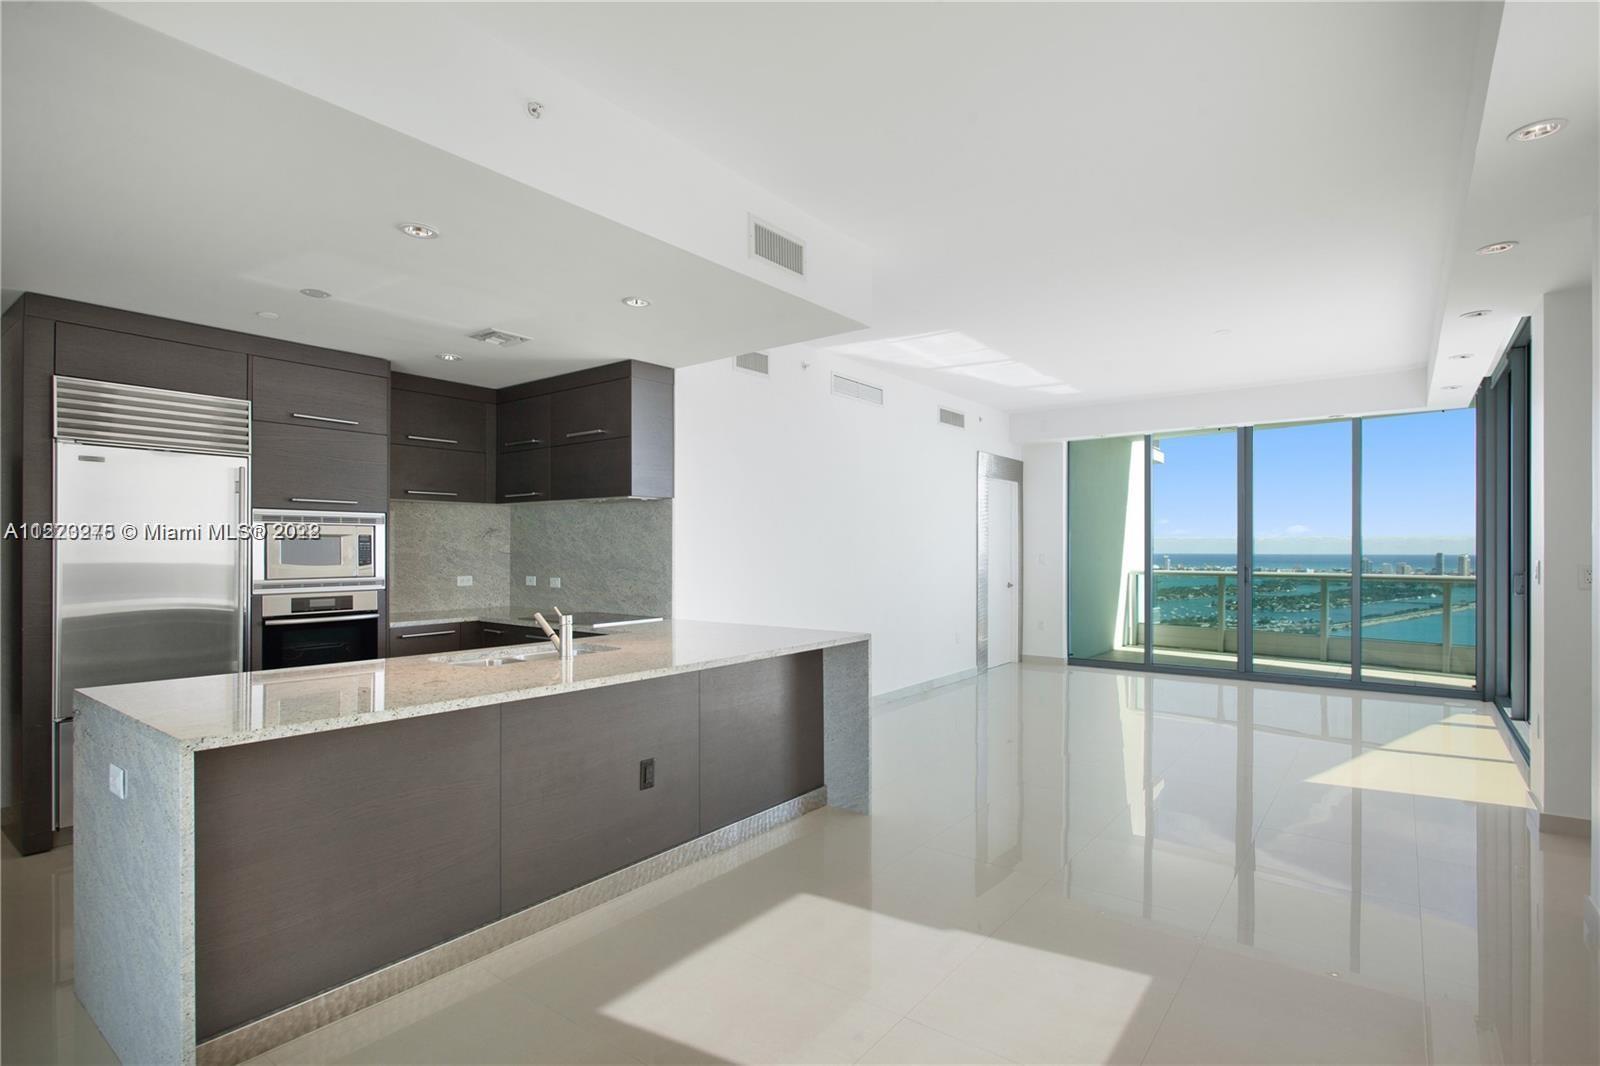 Luxury at its best! Enjoy the breathtaking views of Biscayne Bay and the city in this very modern, e